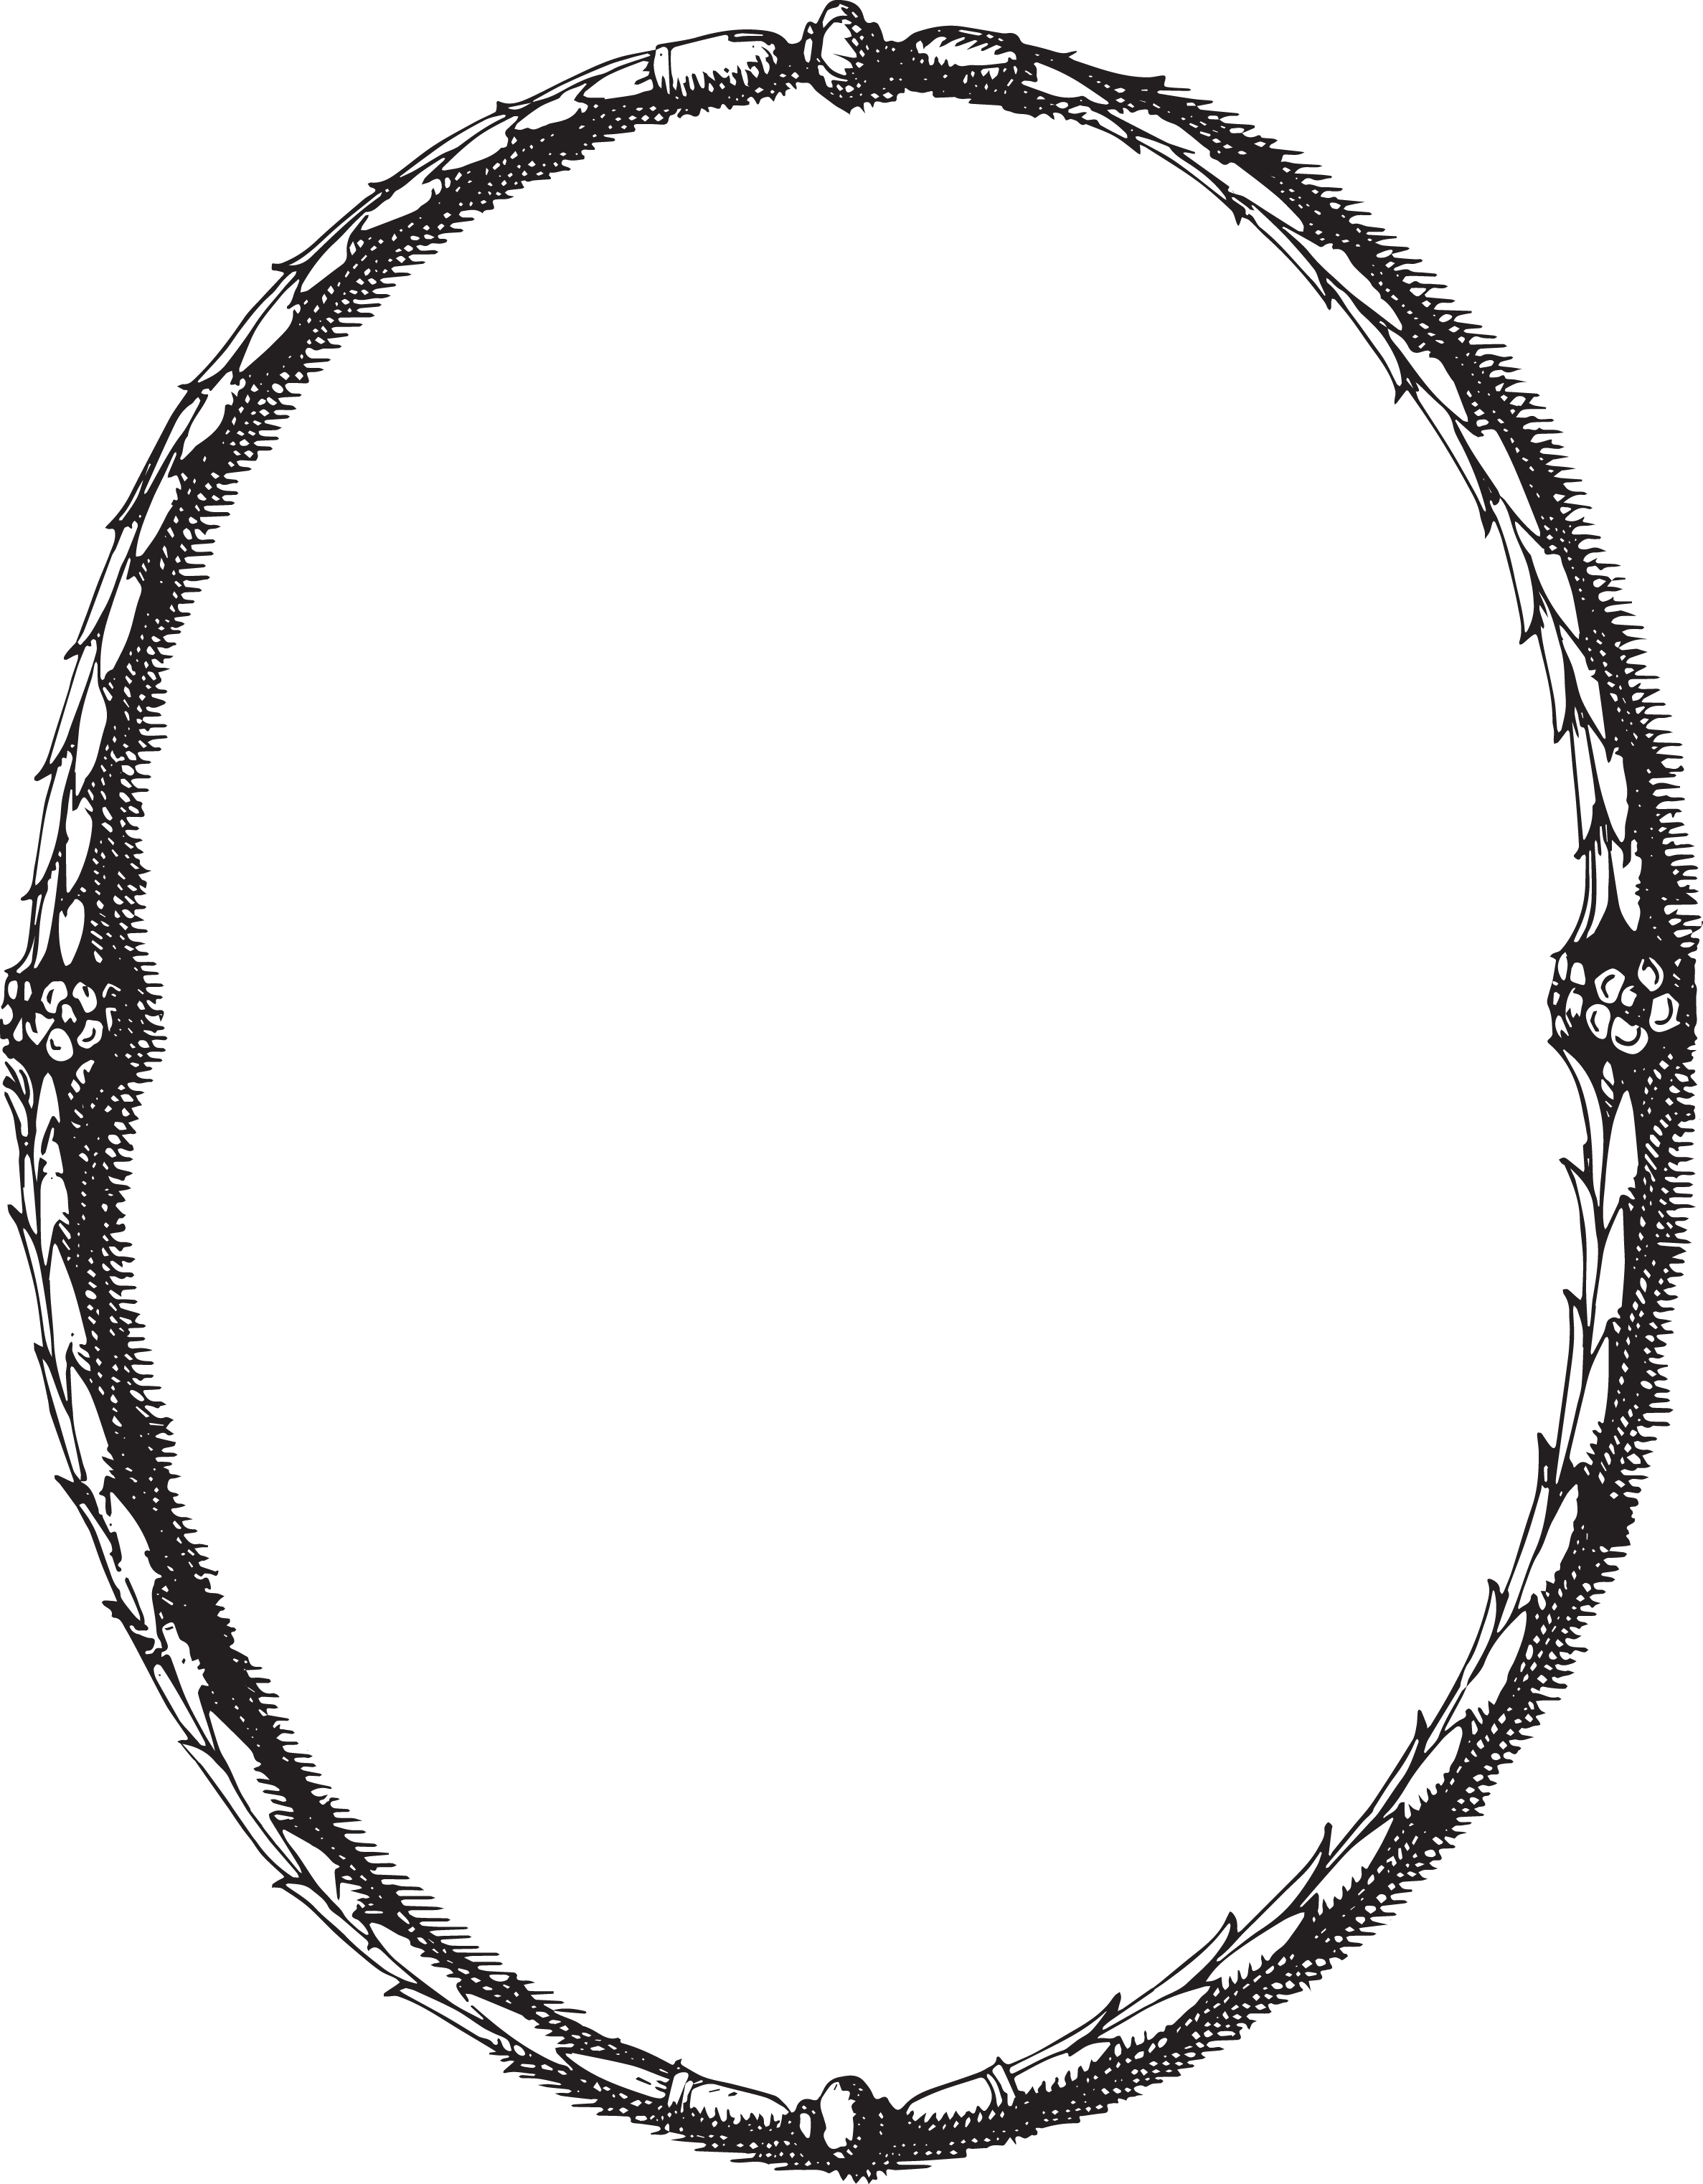 Free oval frame clipart